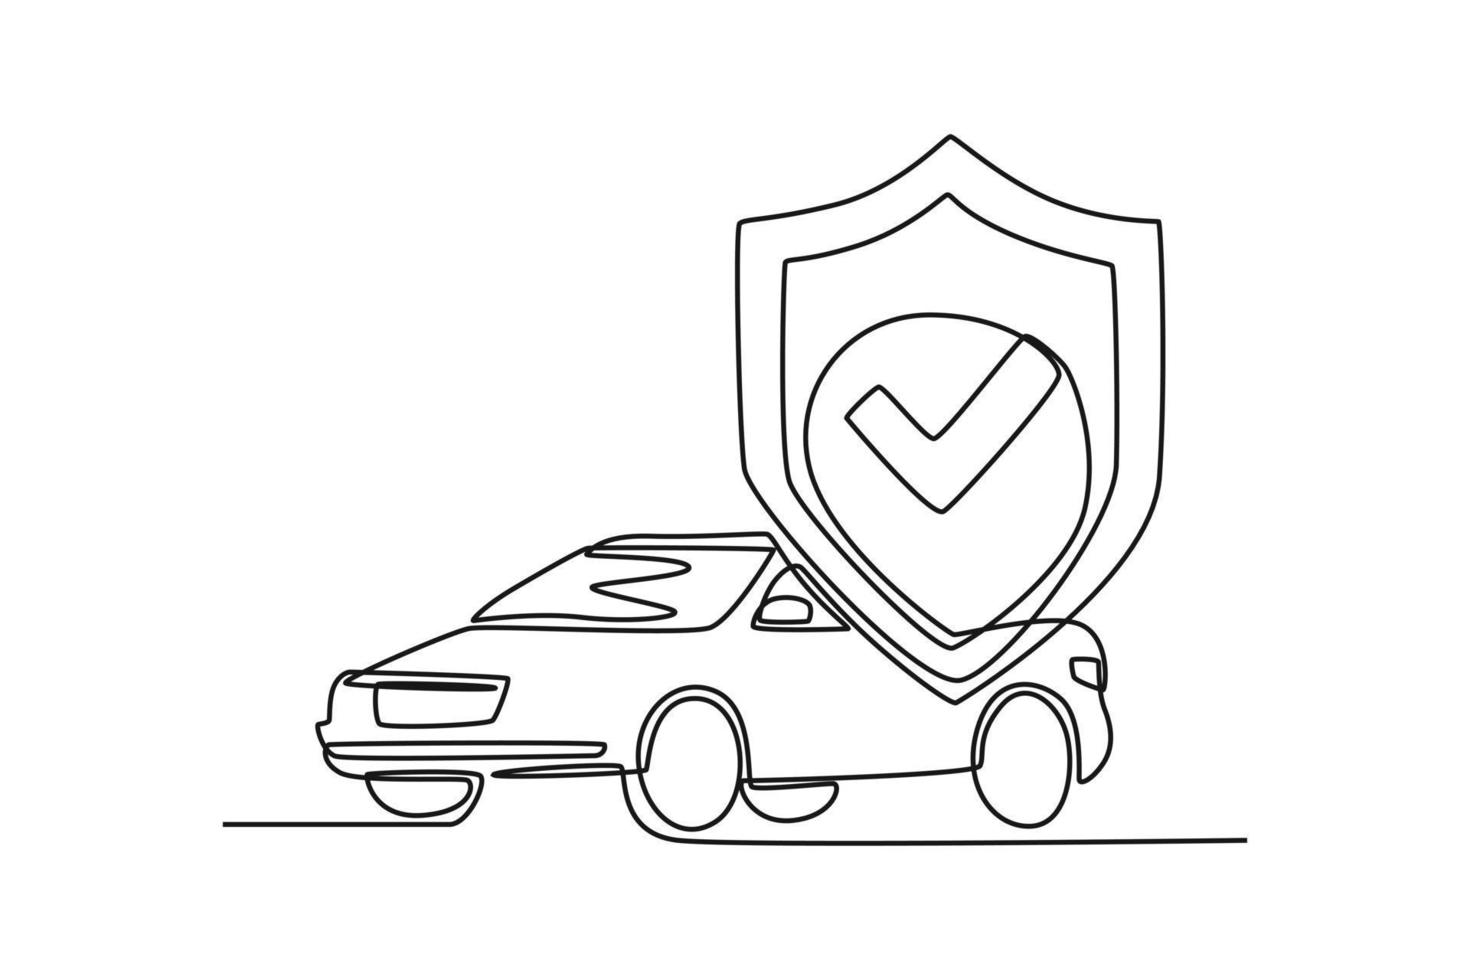 Continuous one-line drawing the car has insurance. Insurance concept single line draws design graphic vector illustration